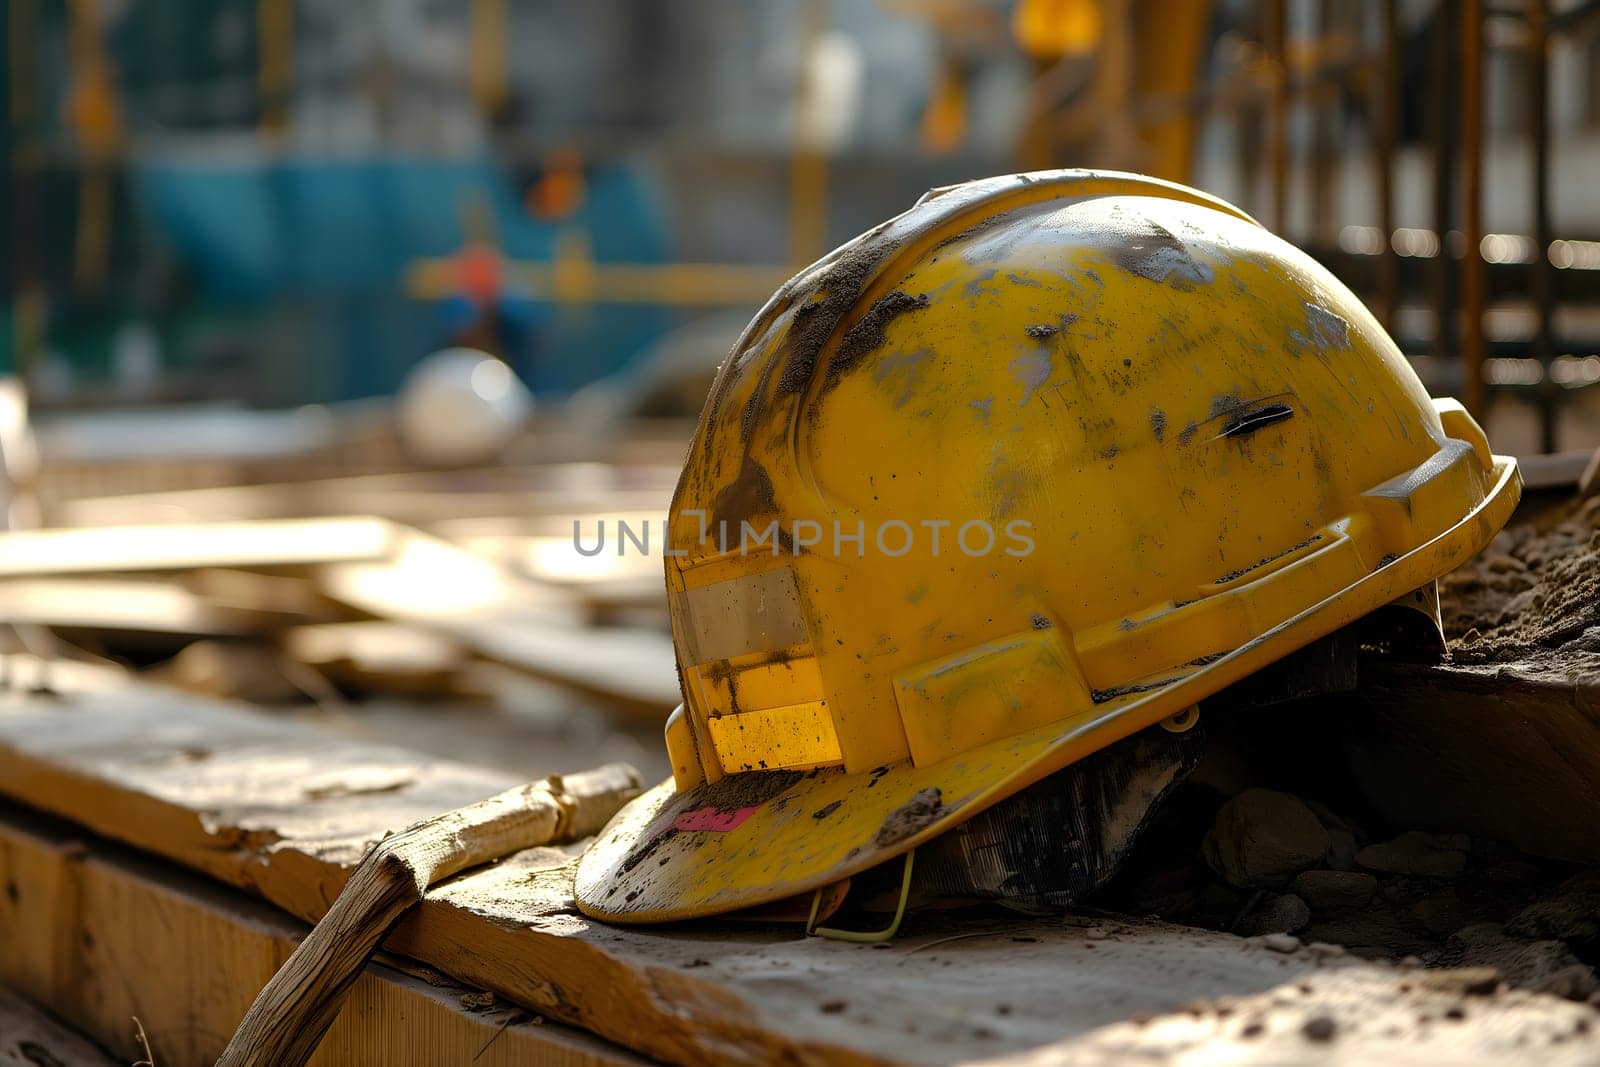 Old yellow hard hat at construction site. Neural network generated image. Not based on any actual scene or pattern.